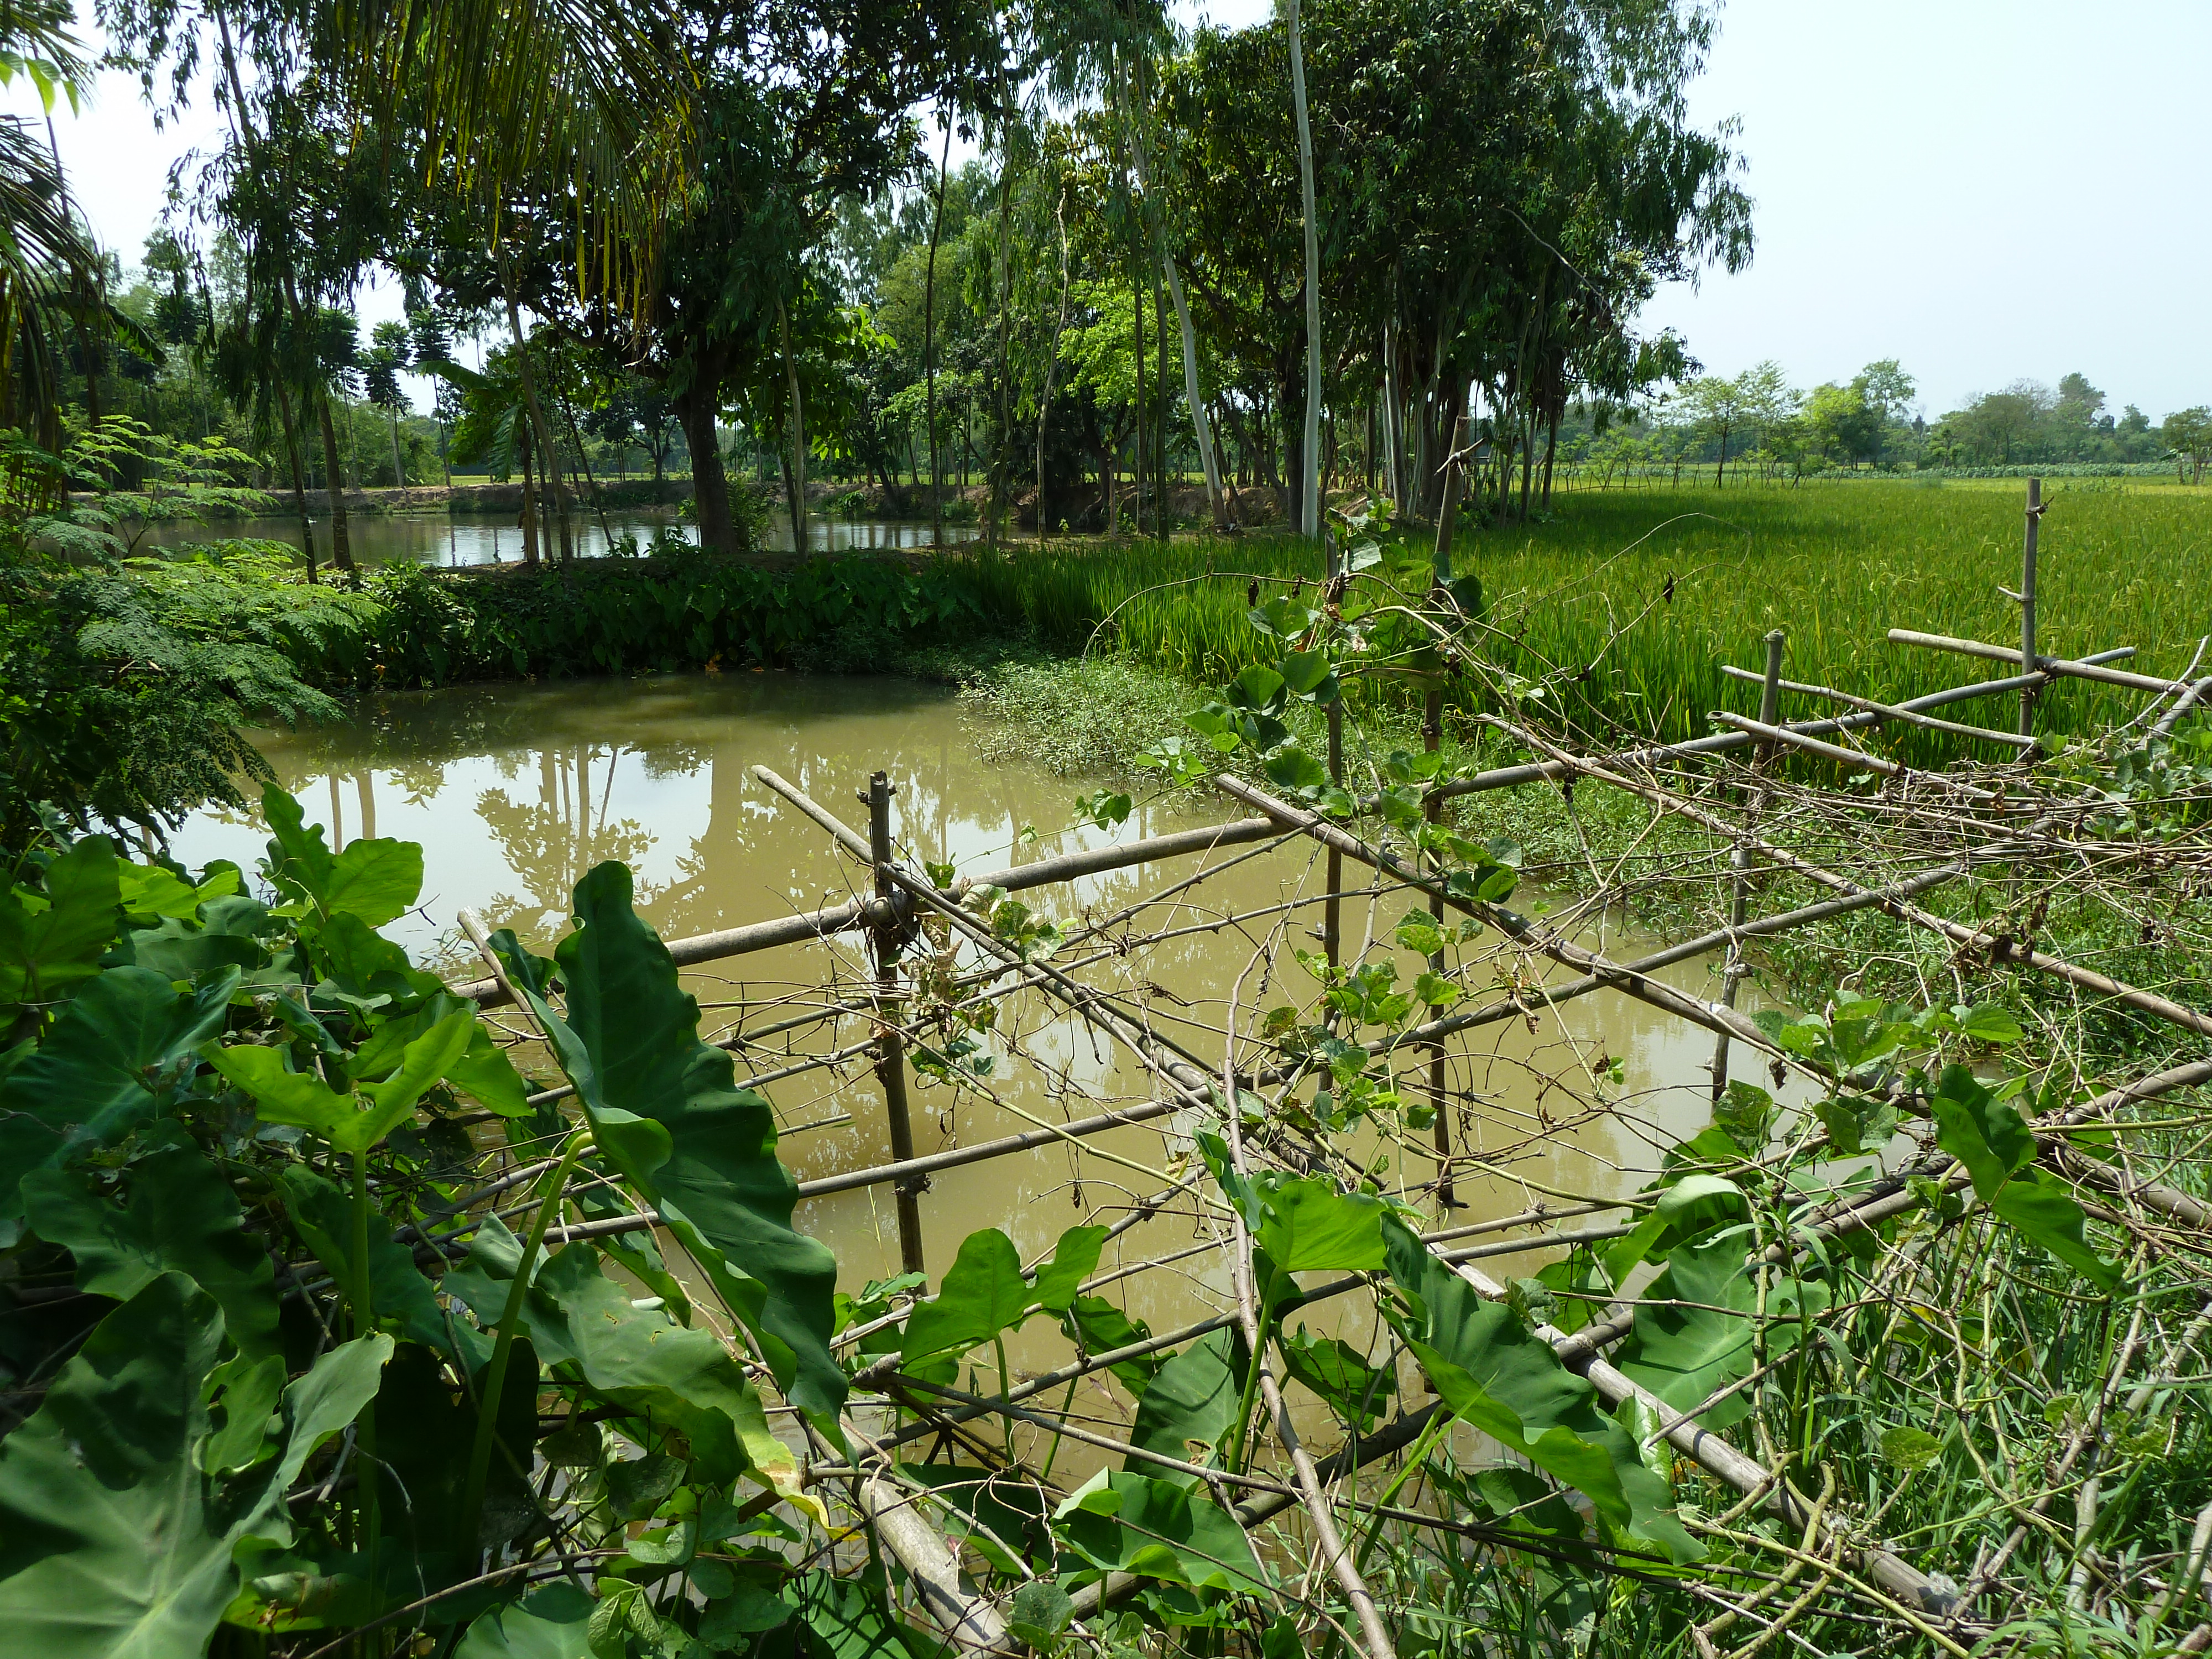 Rice-fish farming in the Joypurhat district, Bangladesh. Image Credit: Anne Delaporte, Flickr.